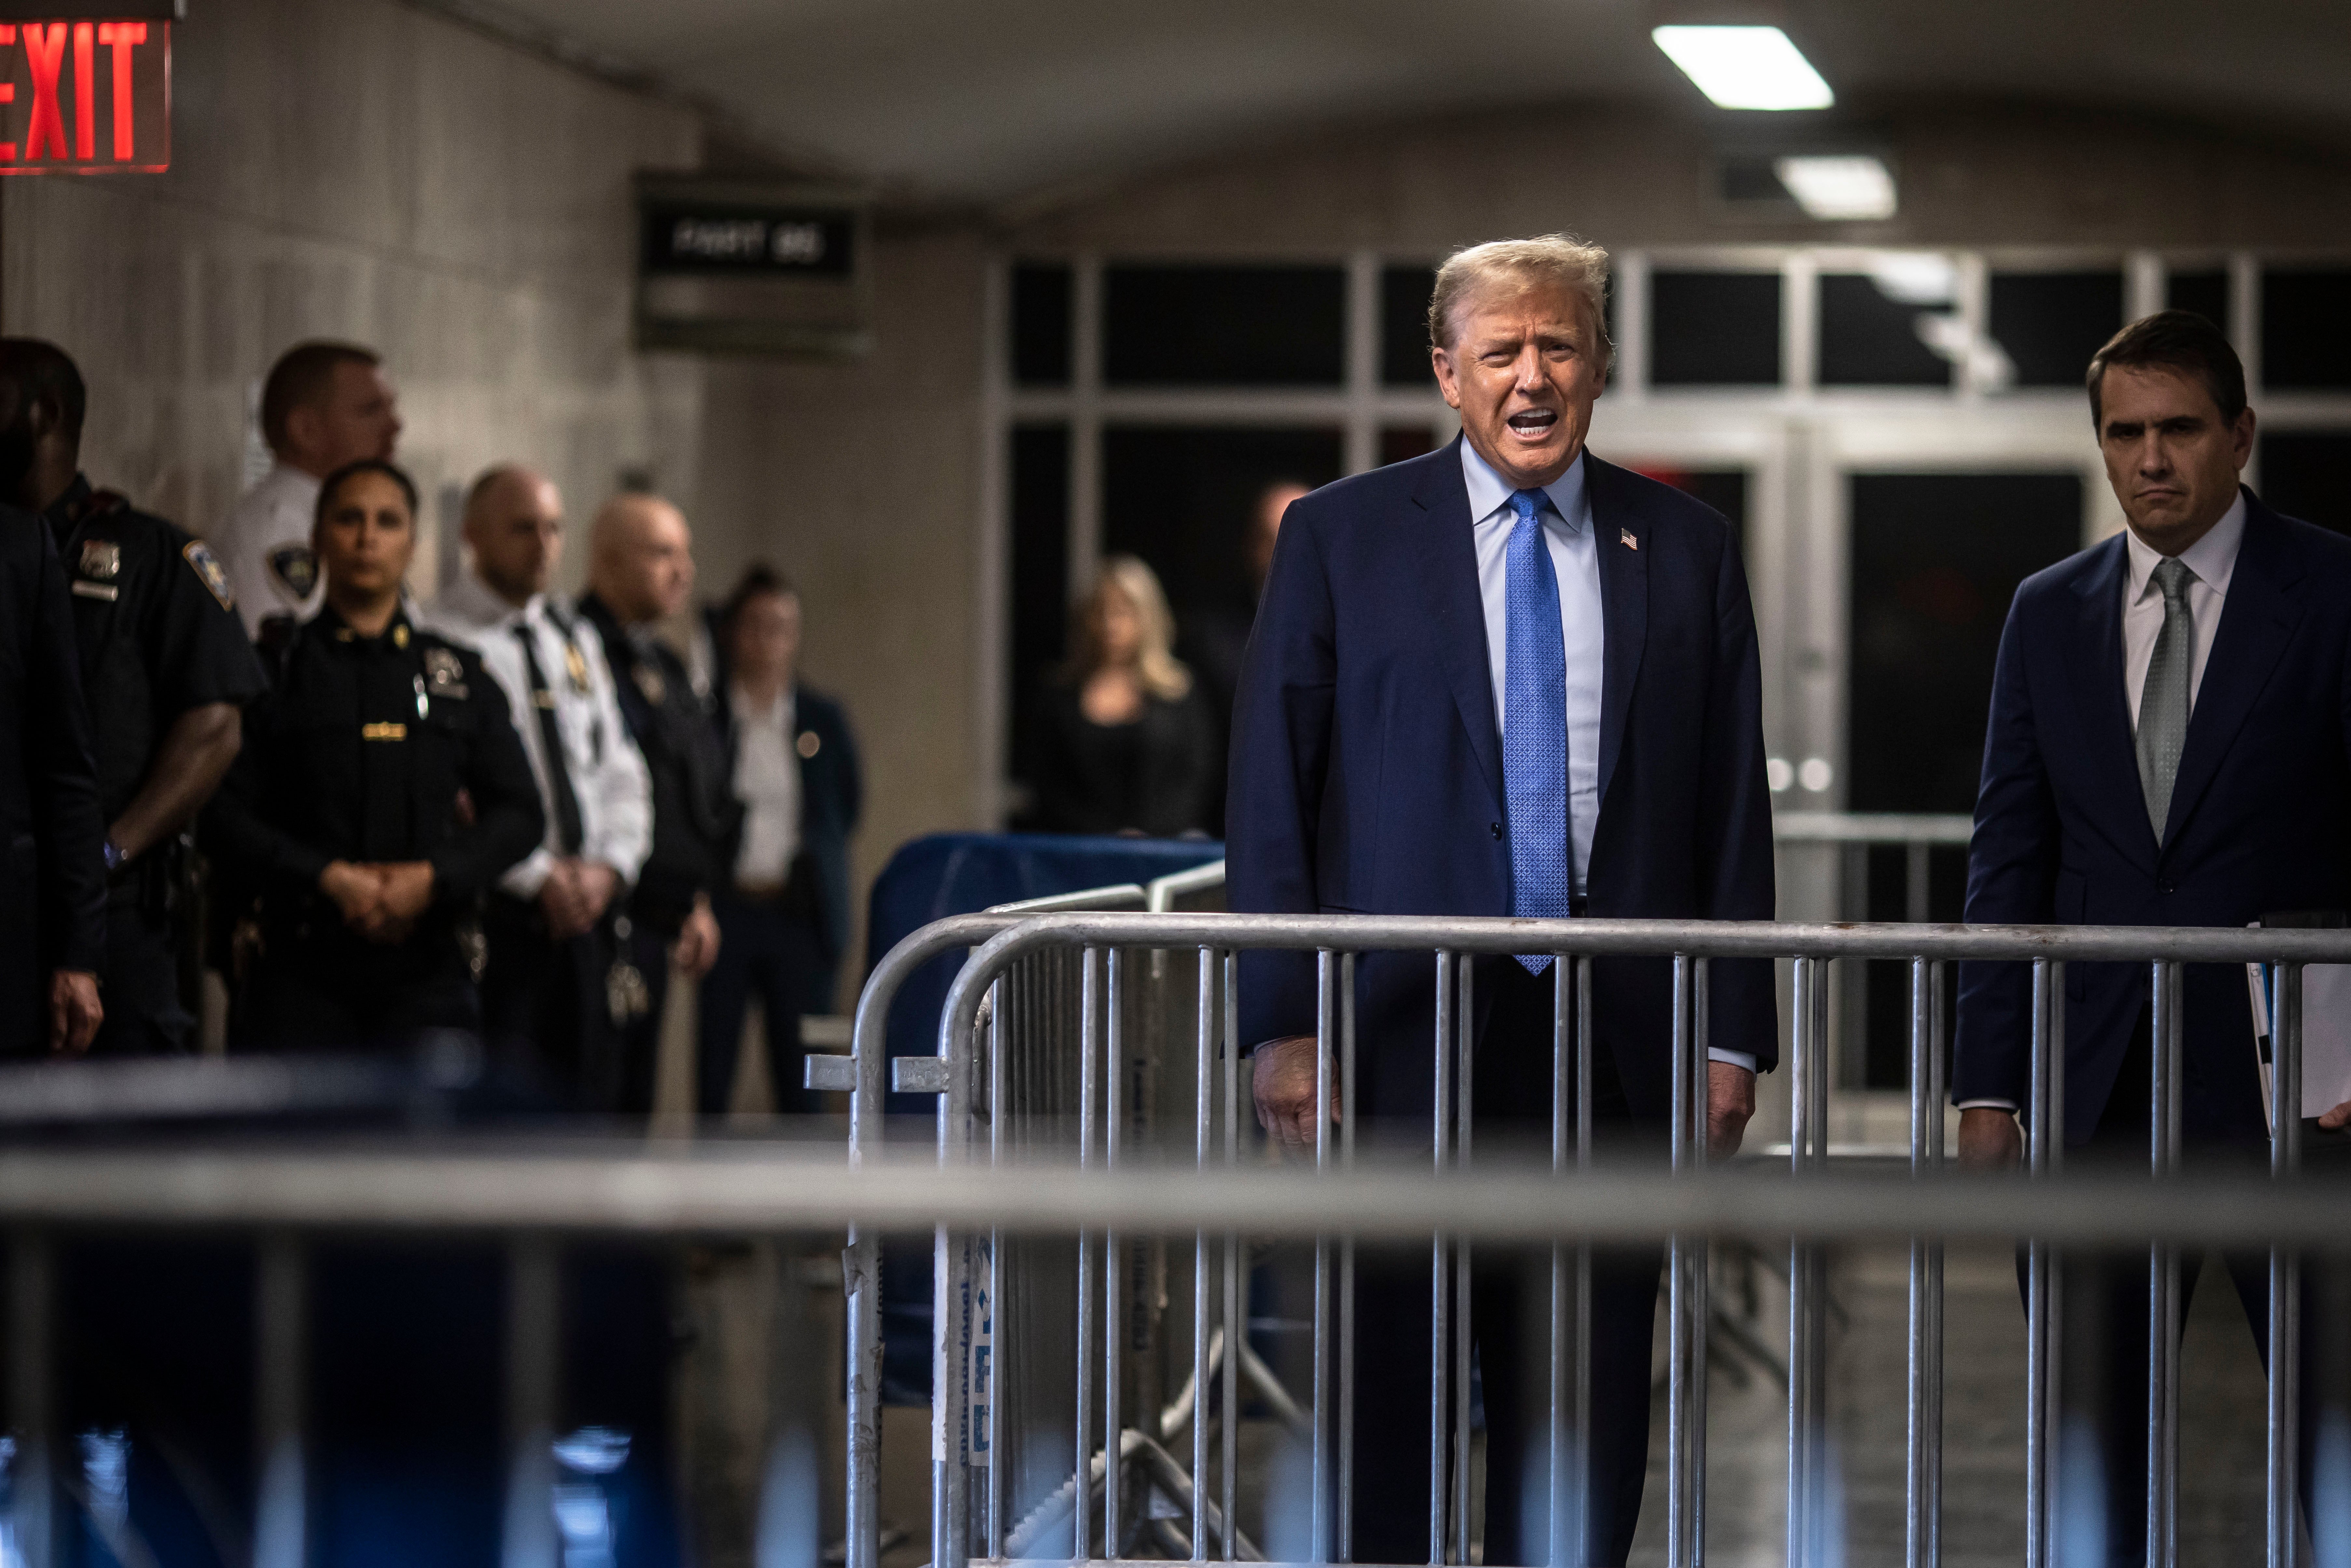 Trump speaks to reporters after leaving a Manhattan courtroom on 26 April